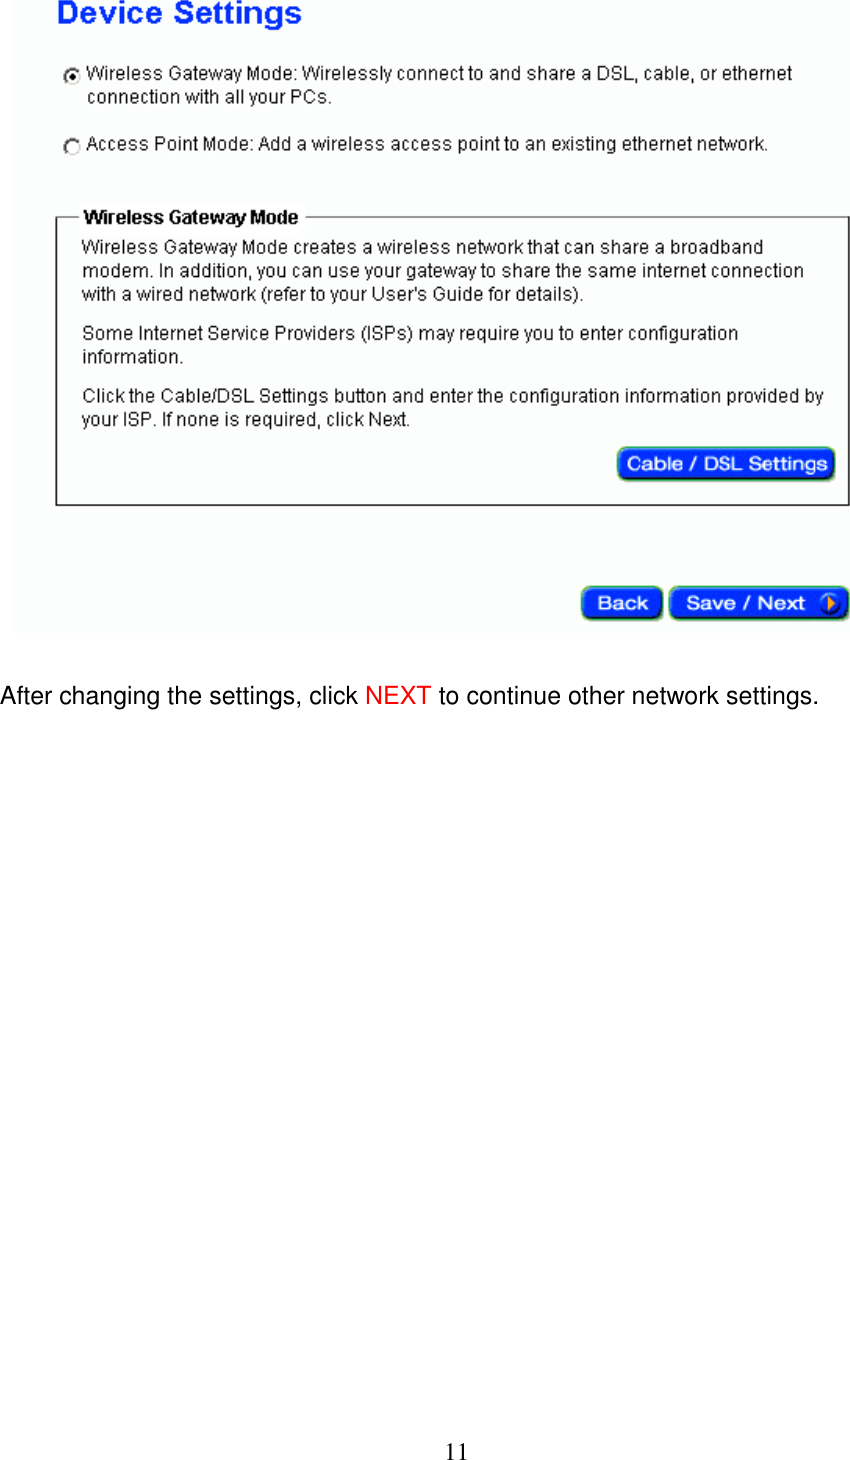 11 After changing the settings, click NEXT to continue other network settings.